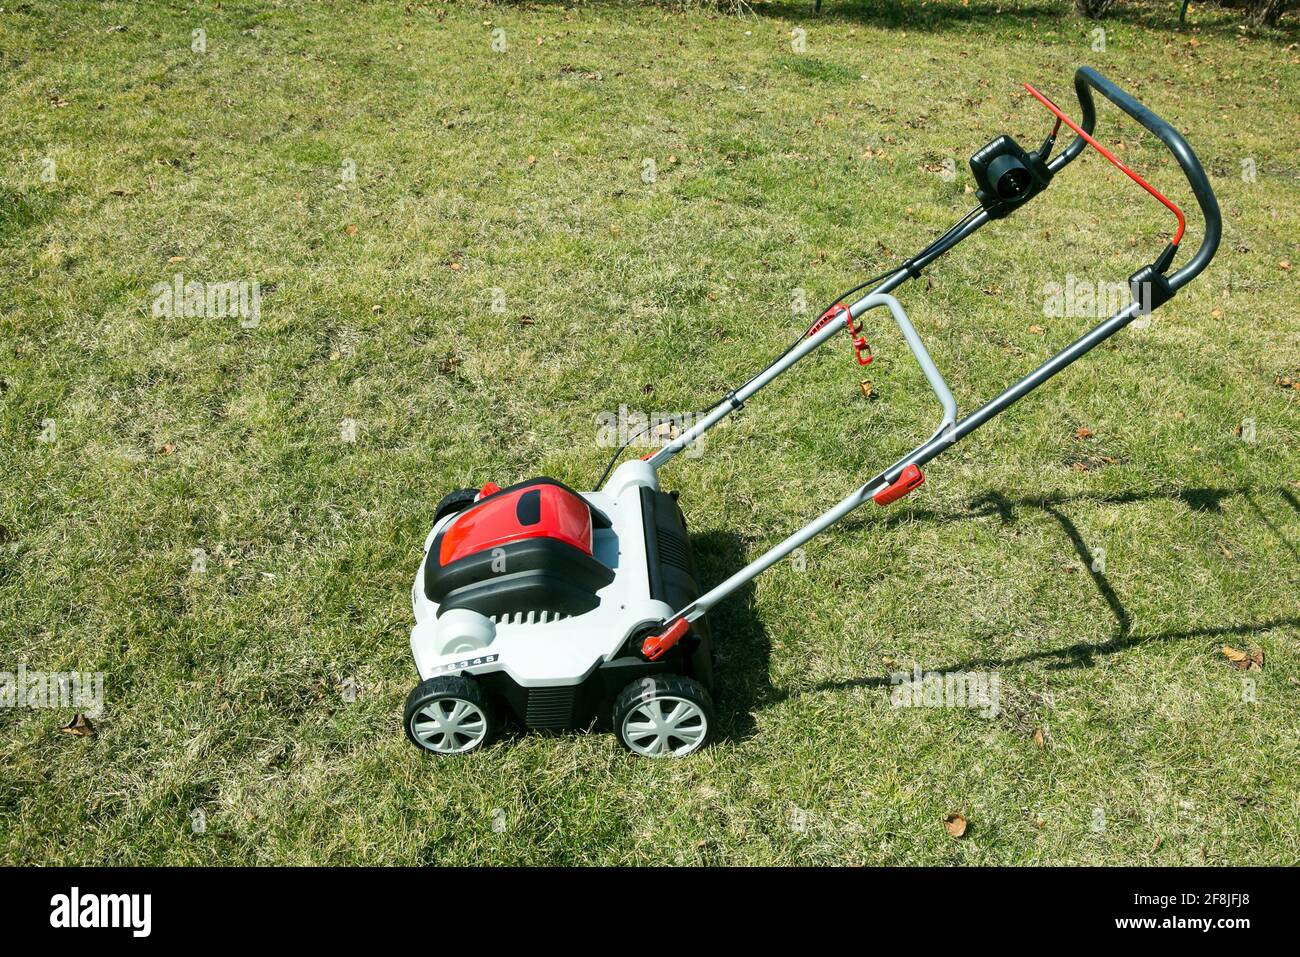 Aerator standing in grass. Aeration with a scarifier. Using a scarifier in the garden to improving quality of the lawn in spring. Stock Photo